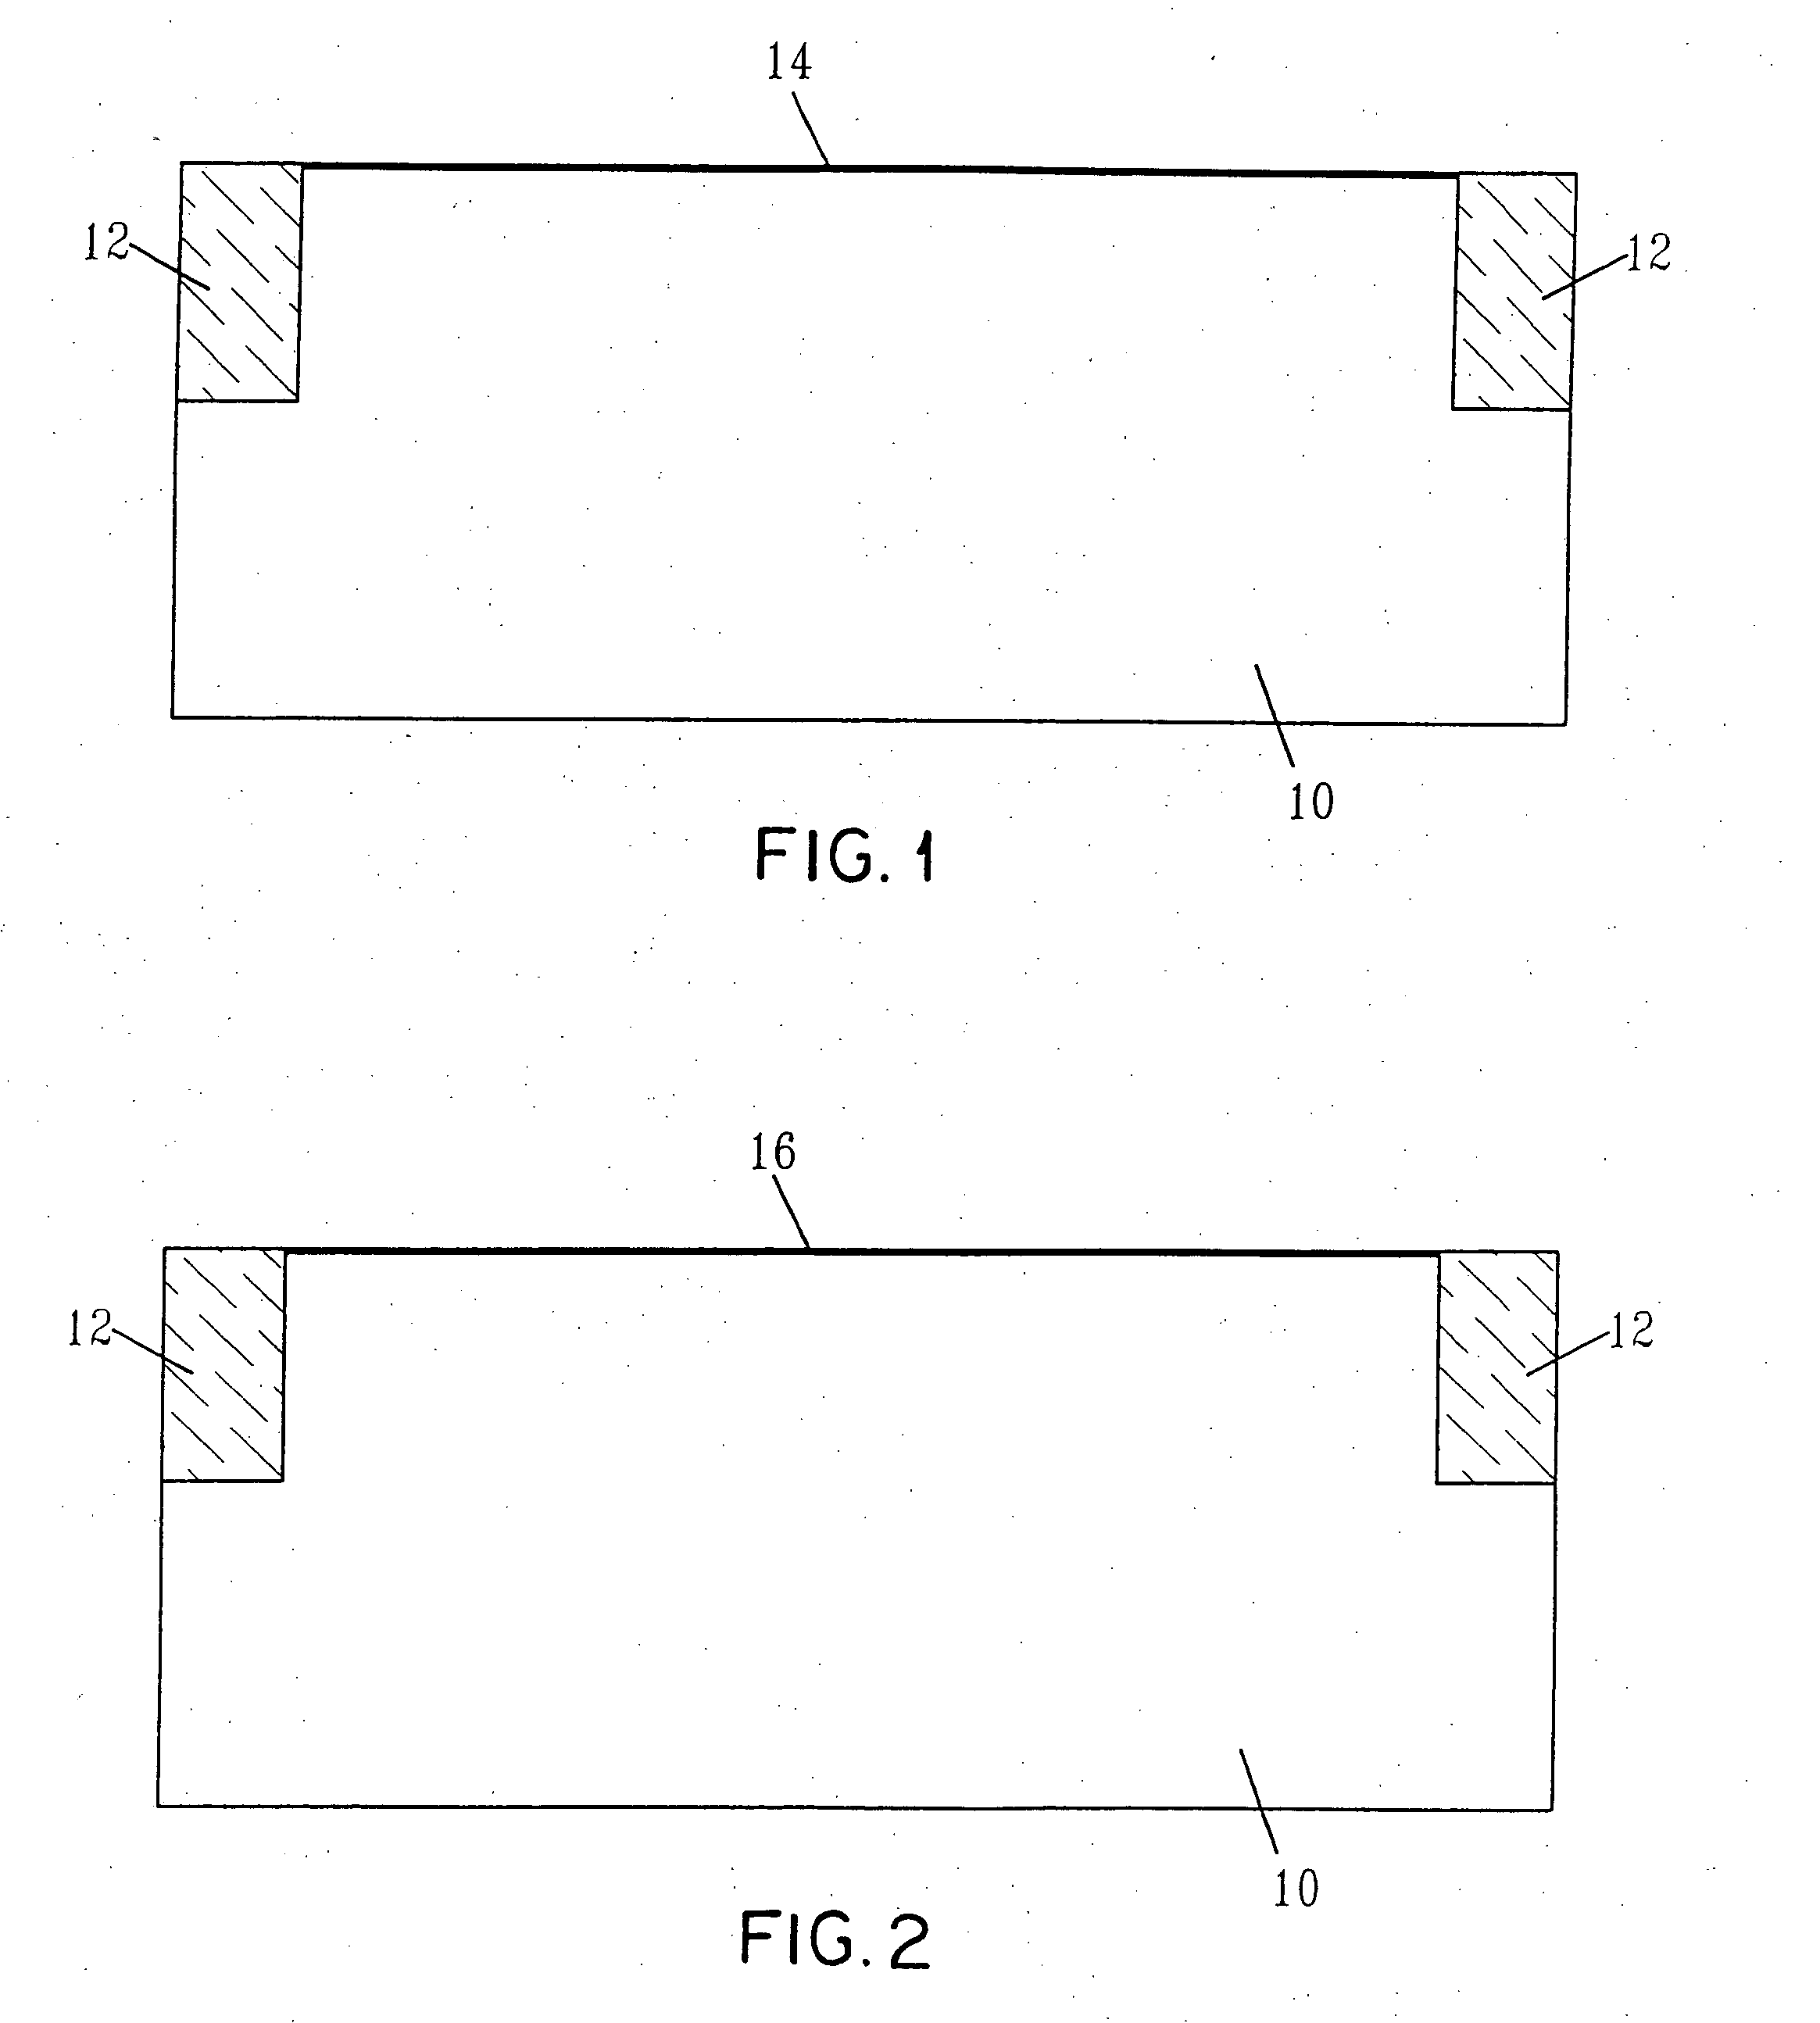 Low resistance T-gate MOSFET device using a damascene gate process and an innovative oxide removal etch